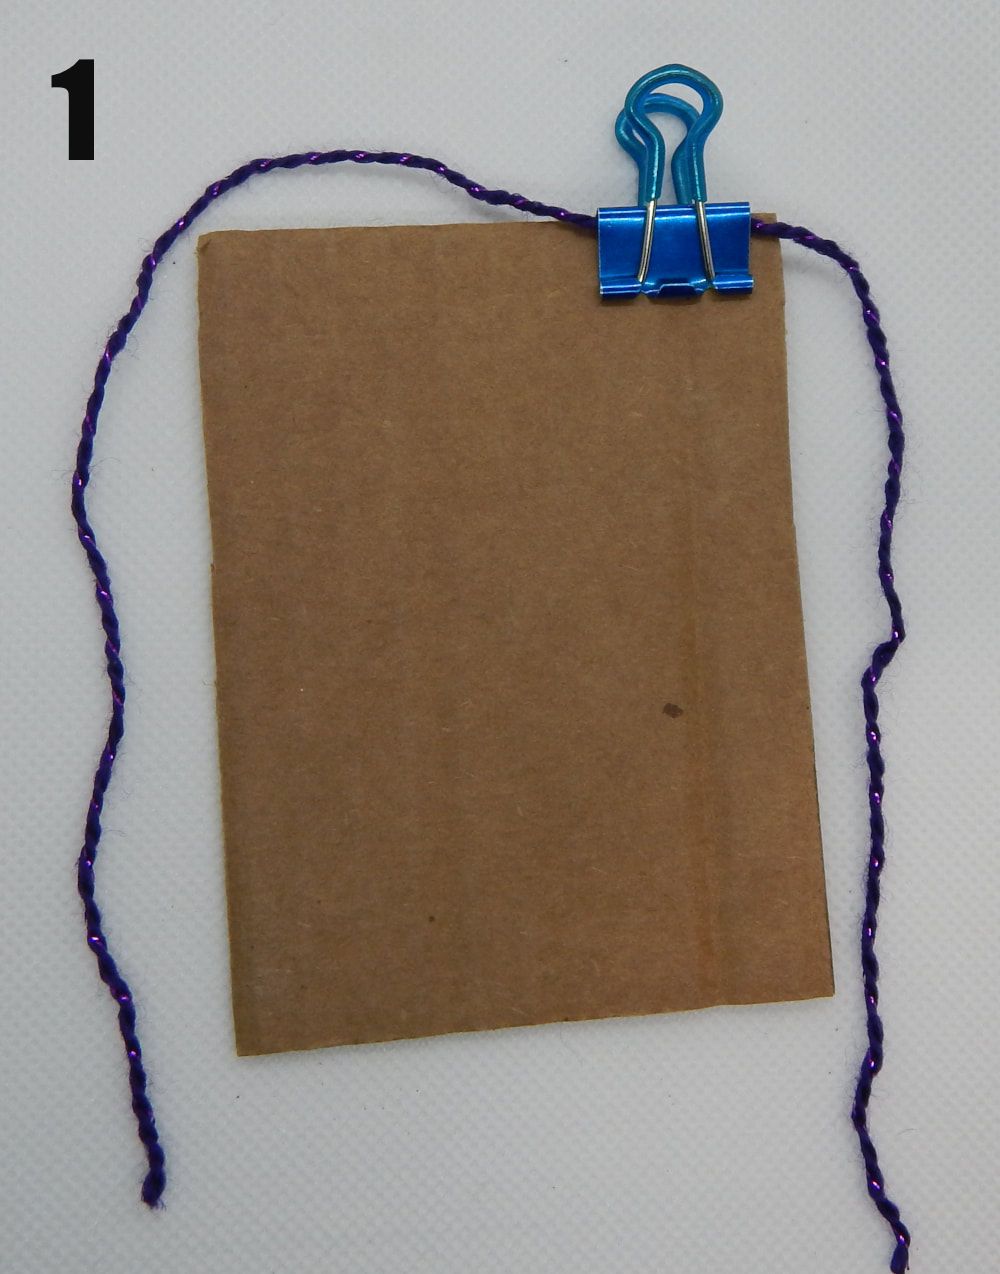 A rectangle of brown cardboard is in the middle. There is a blue binder clip on the upper right corner holding a piece of purple thread onto the cardboard. There is a 1 in the upper left hand corner of the picture.